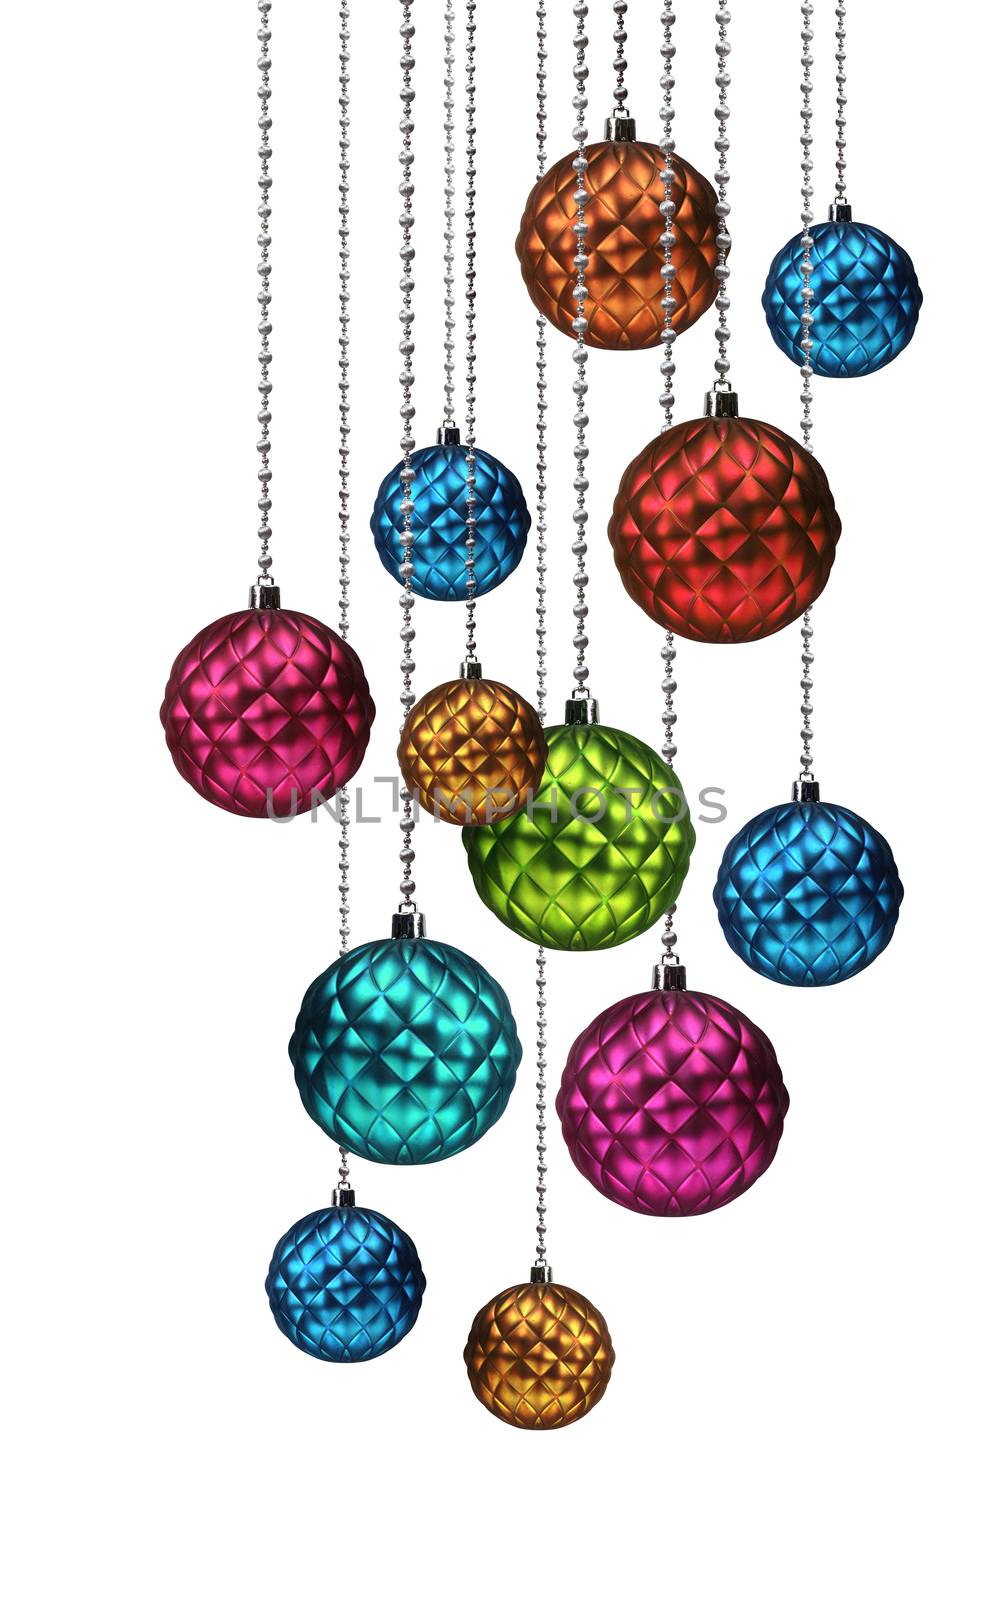 Colorful Christmas balls group hanging by anterovium